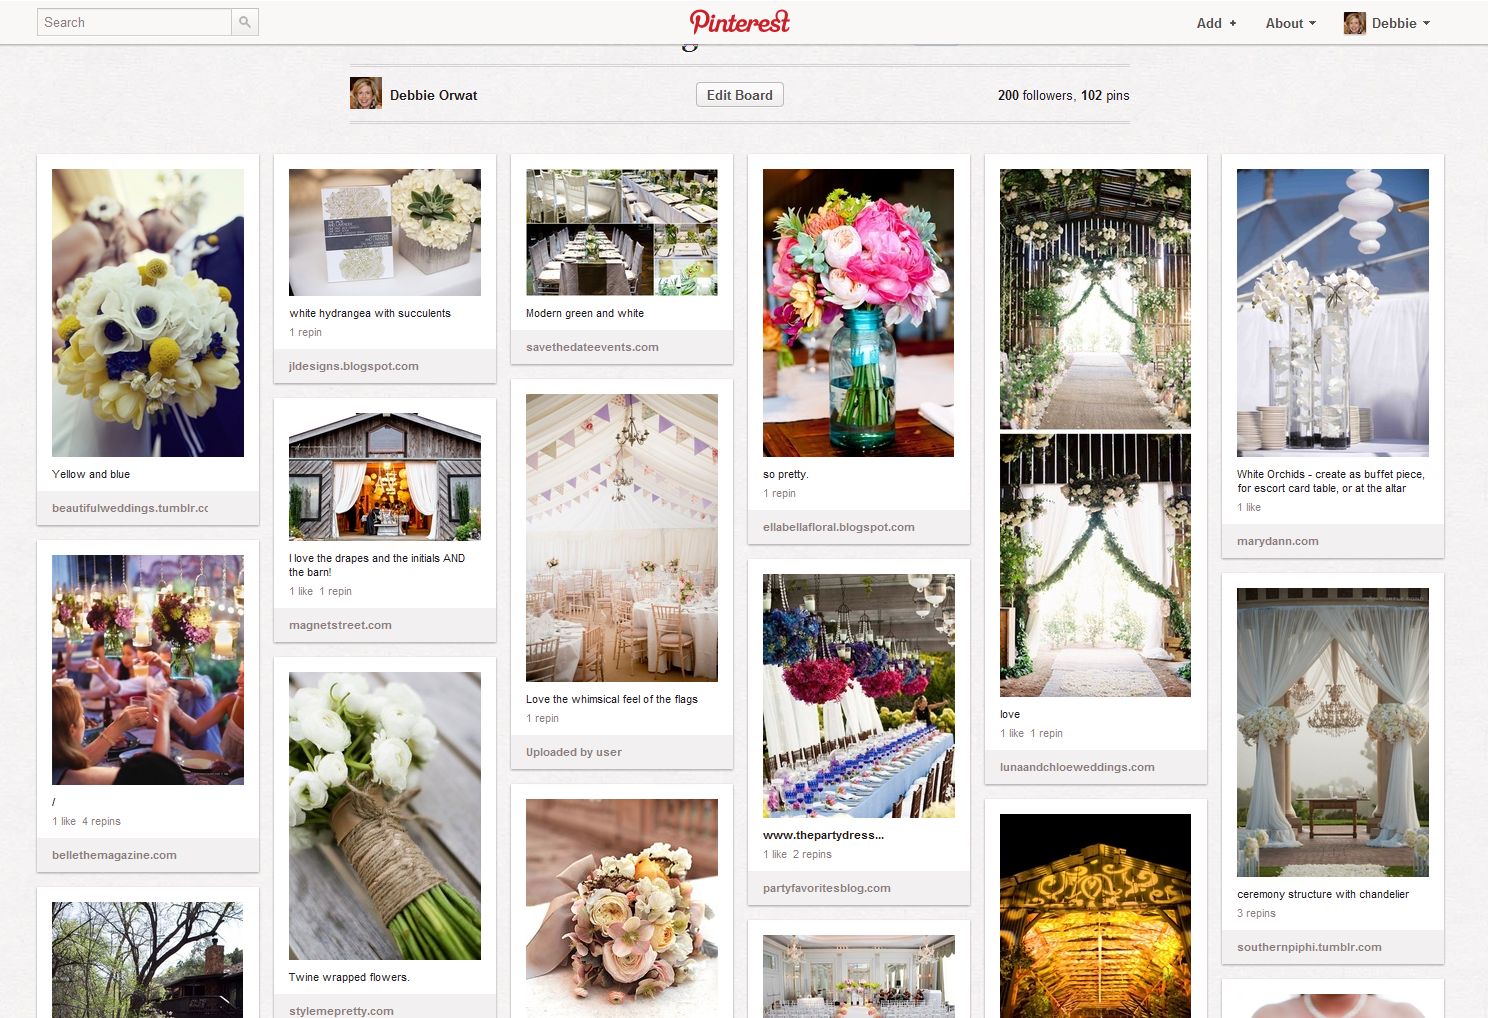 5 Ideas for Using Pinterest in Your Business